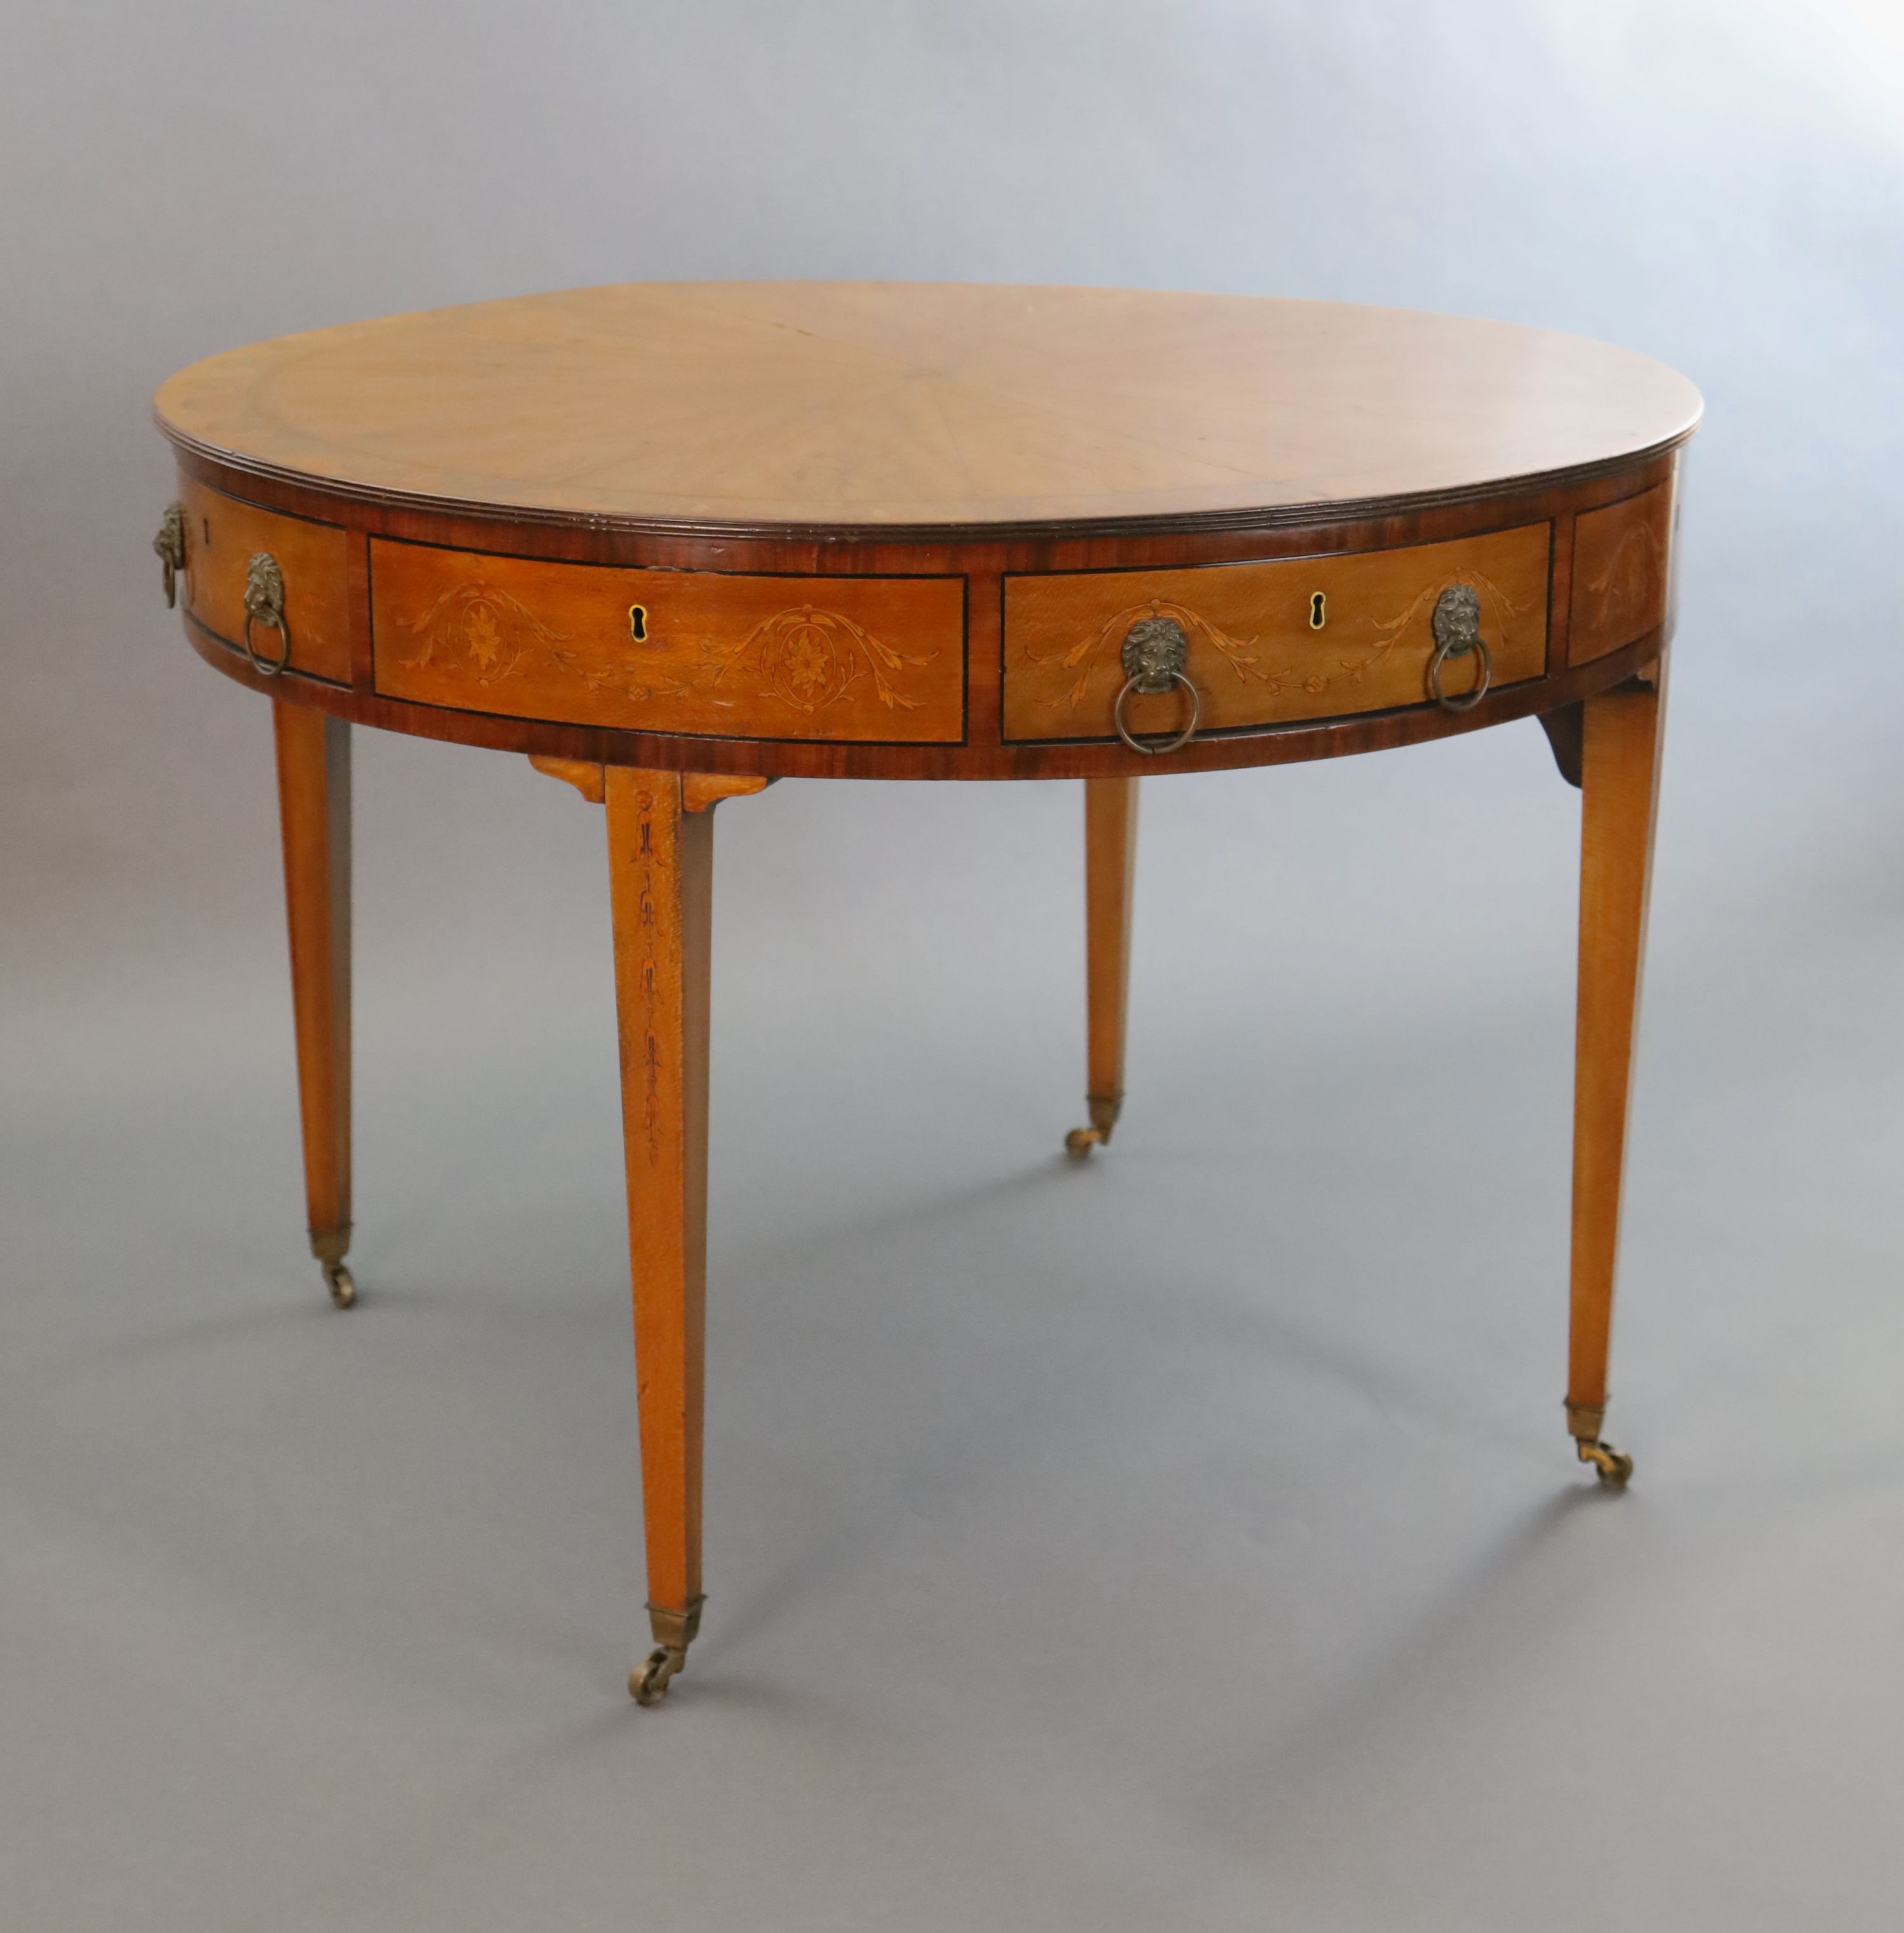 An Edwardian marquetry inlaid satinwood drum top library table, Diam. 3ft 5.5in H.2ft 5.5in.